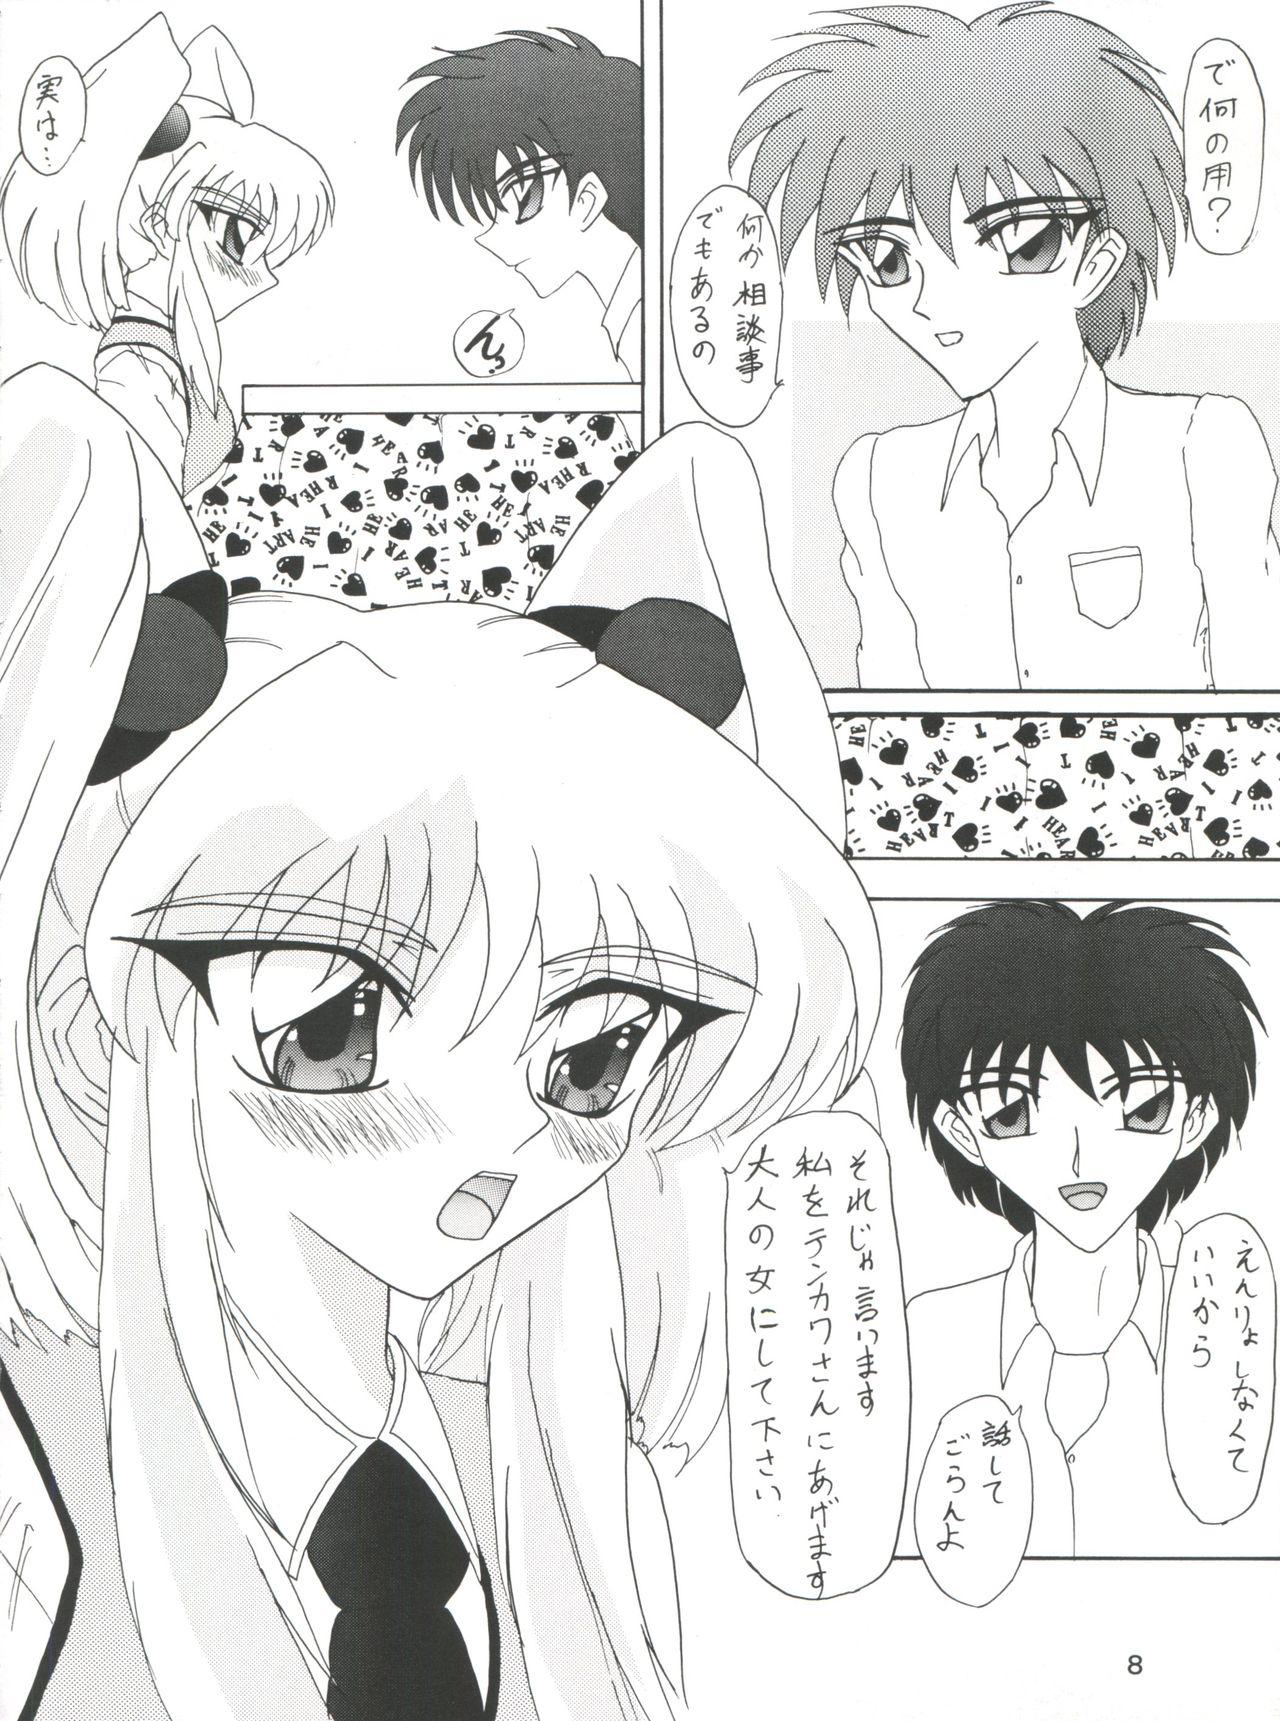 Cheating PROMINENT 11 - Martian successor nadesico Hardcore Rough Sex - Page 8